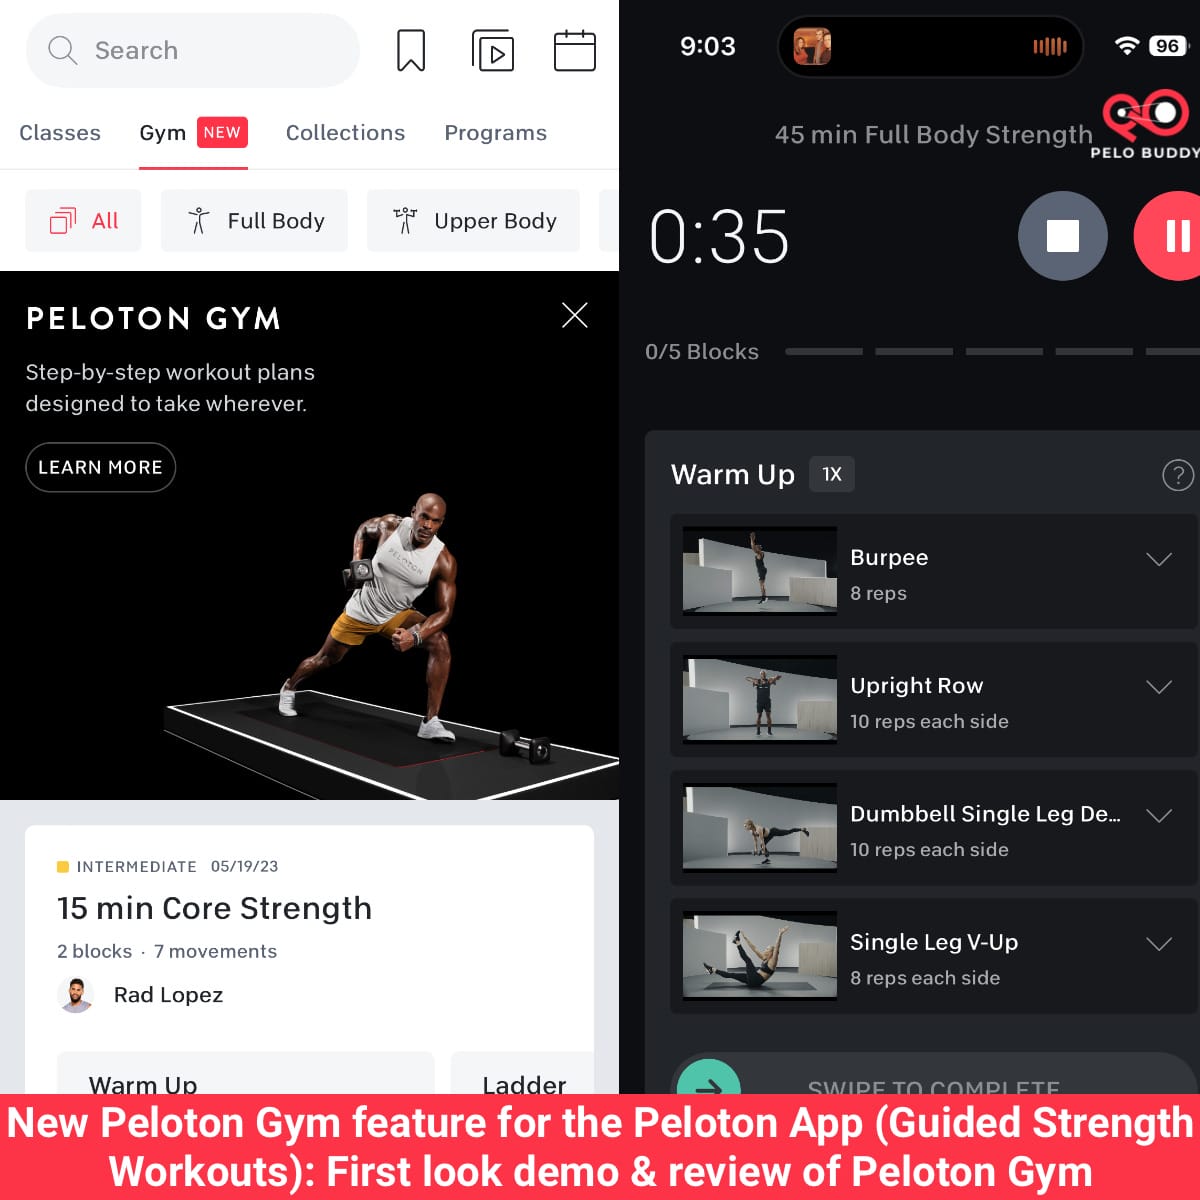 New Peloton Gym feature for the Peloton App (Guided Strength Workouts